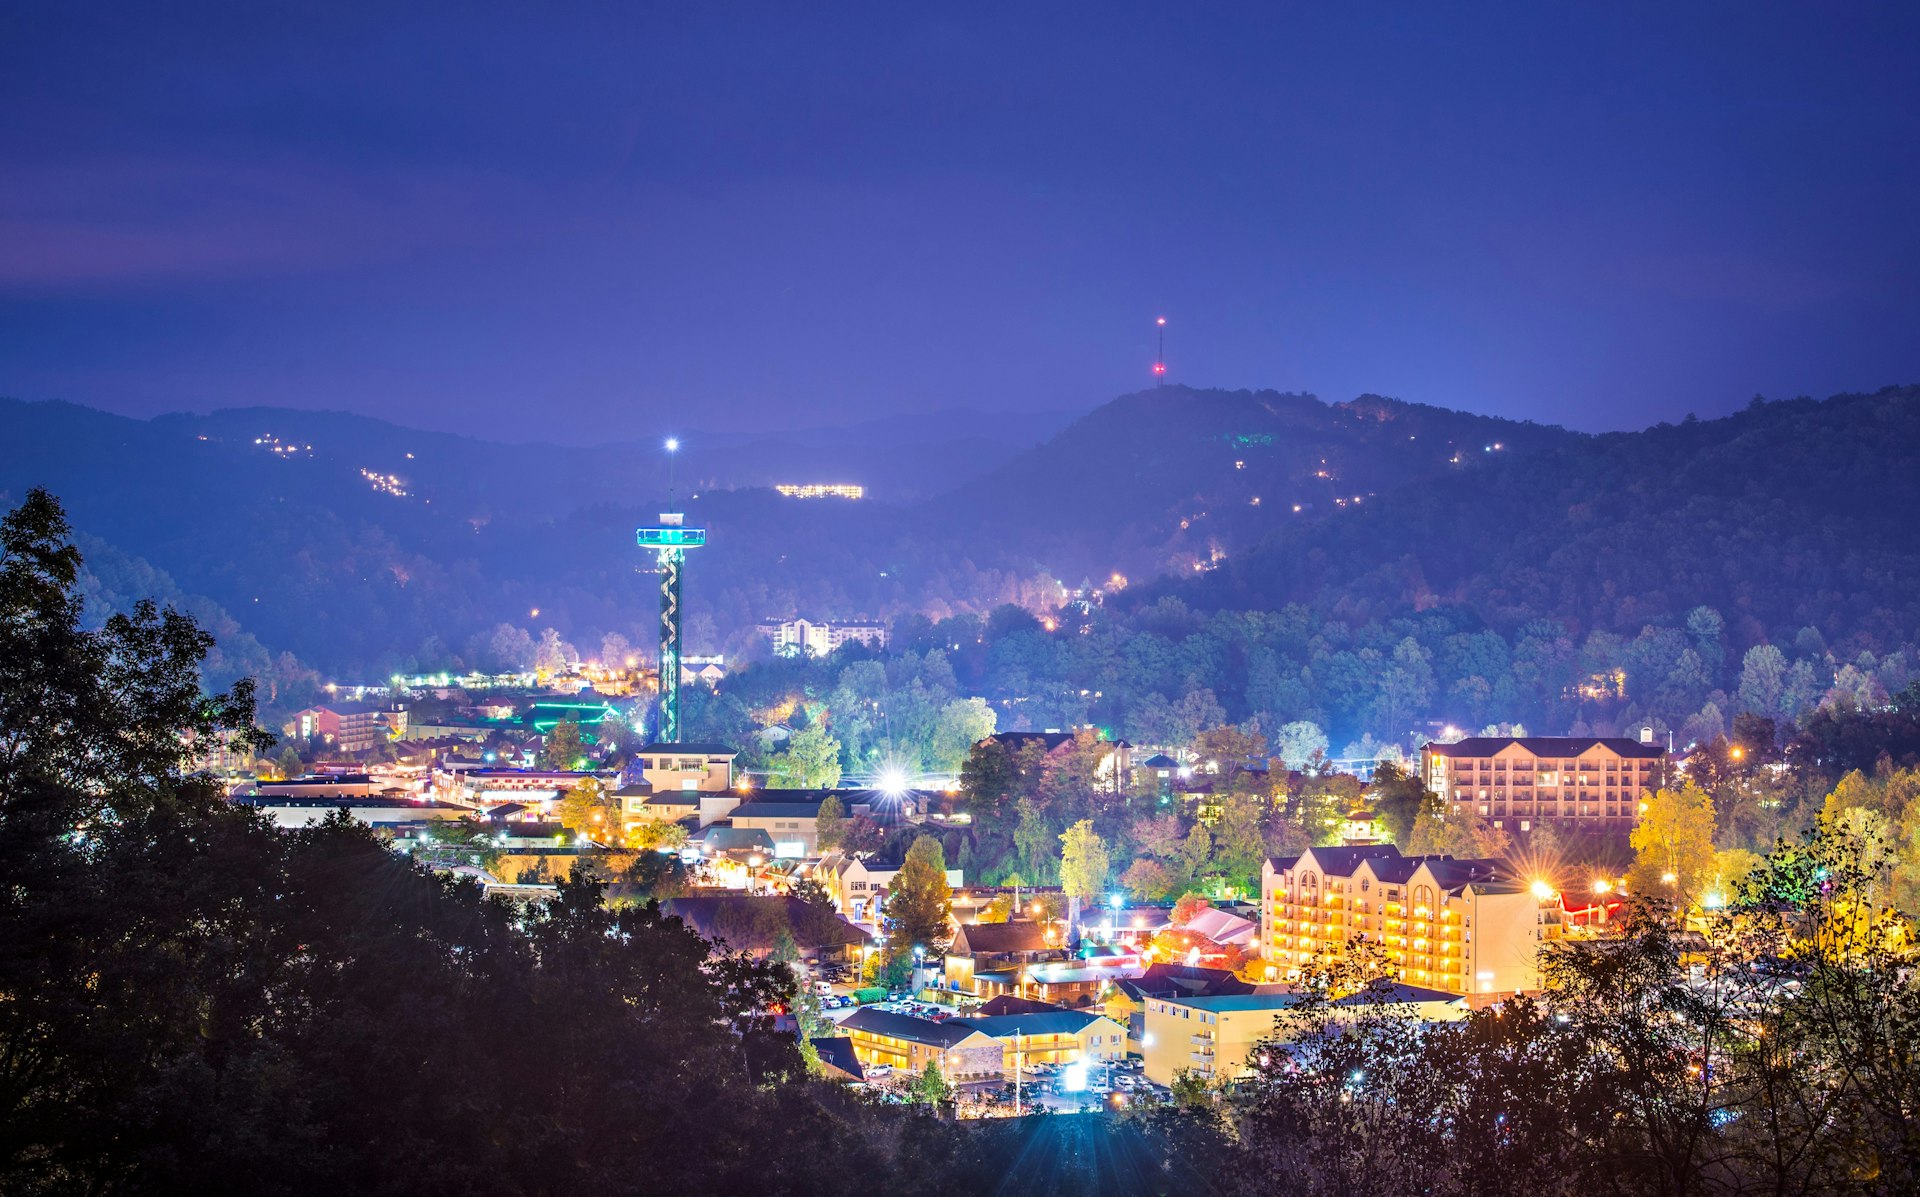 Town of Gatlinburg Tennessee lit up at night